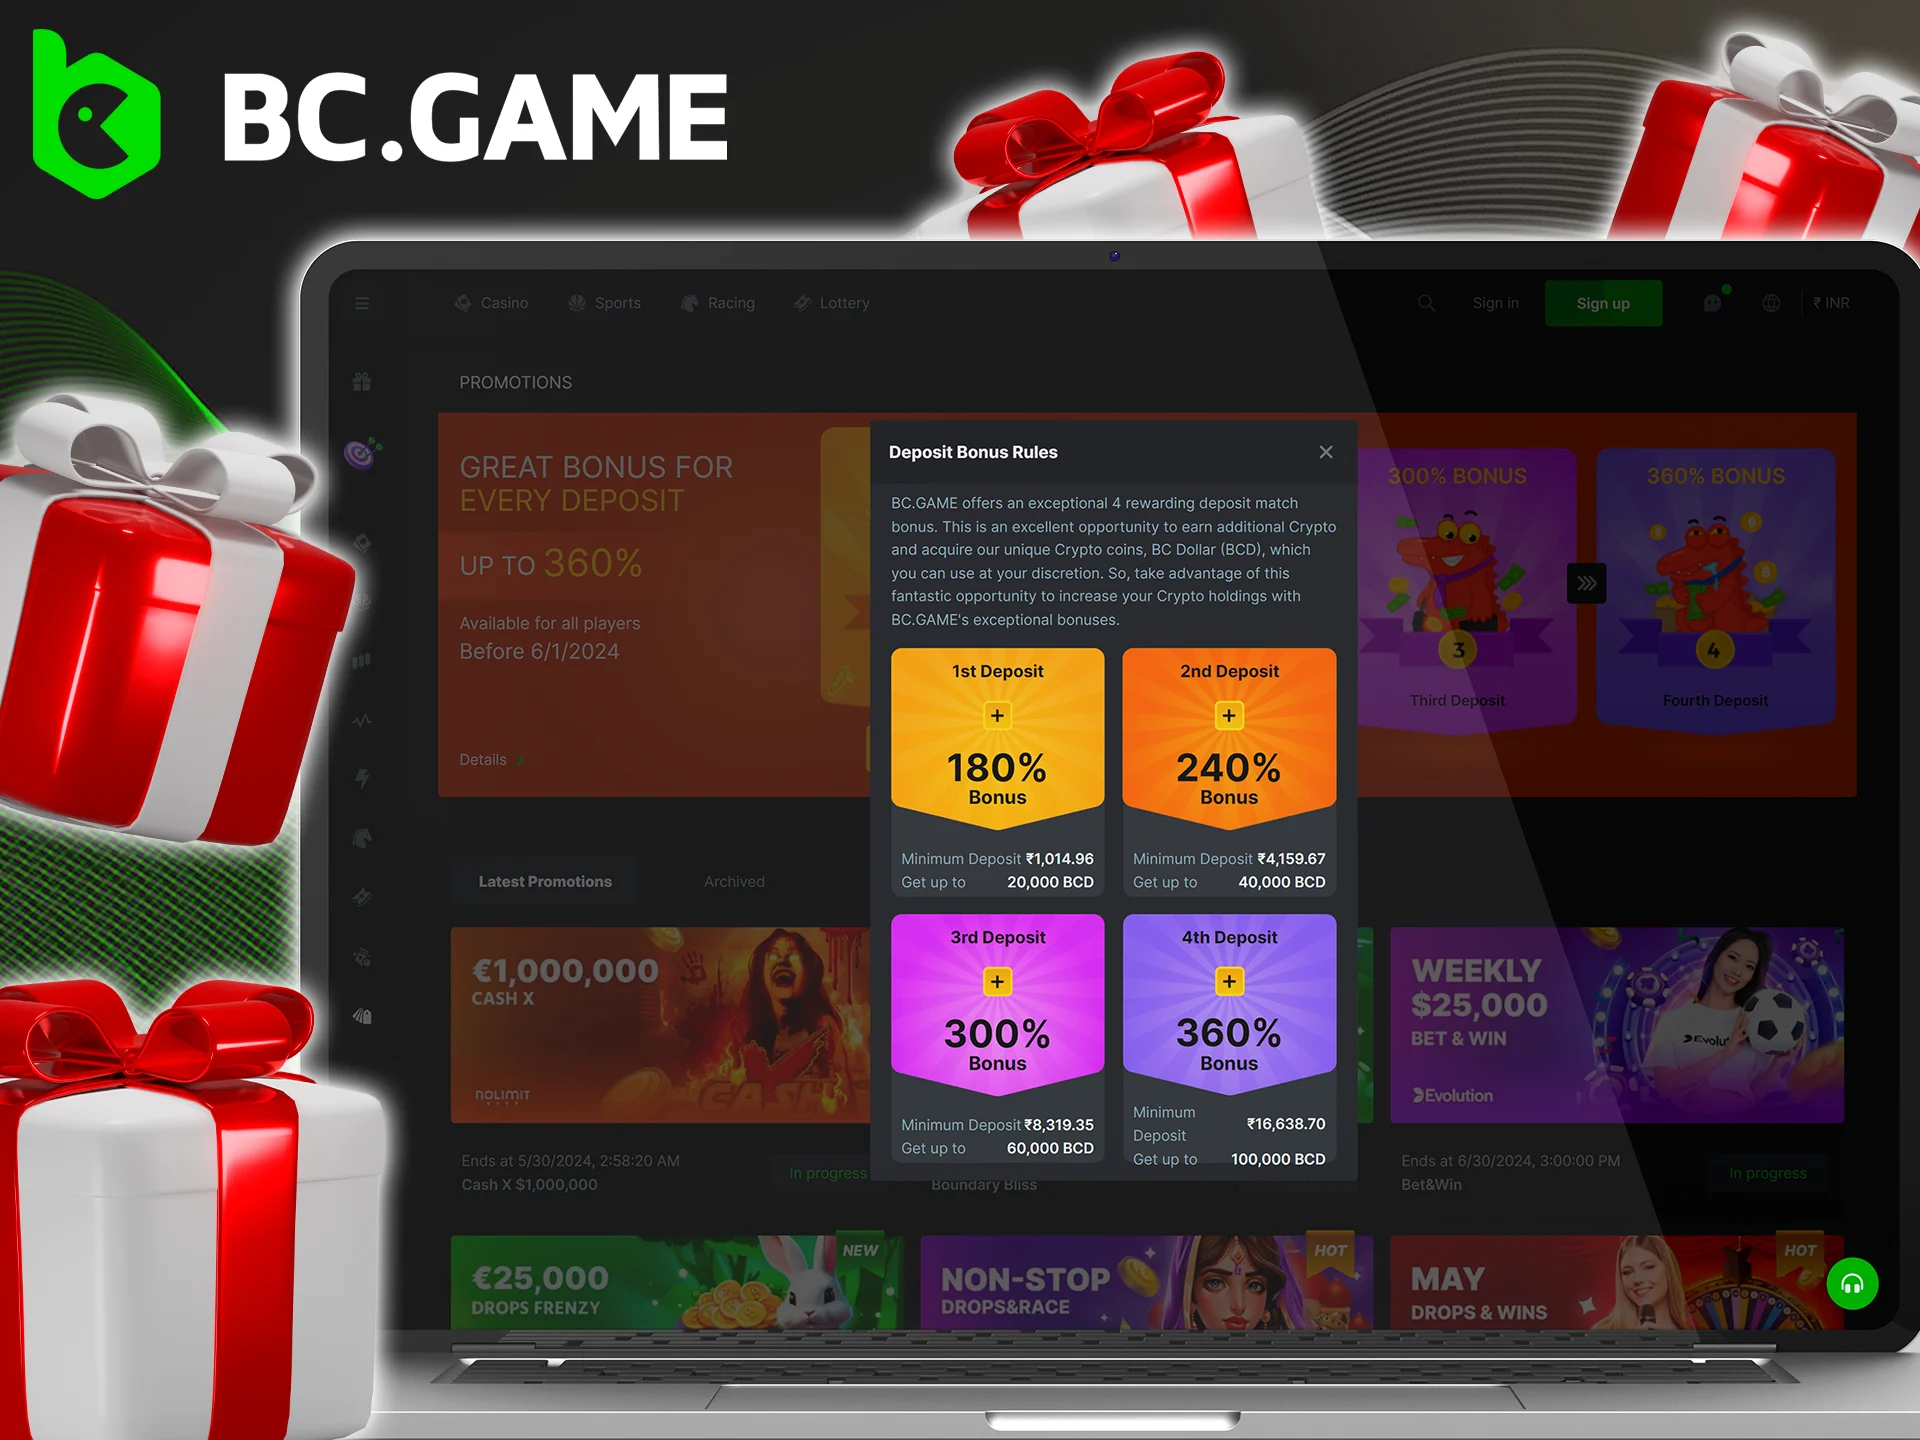 Don't miss out on the opportunity to get BC Game welcome bonus.